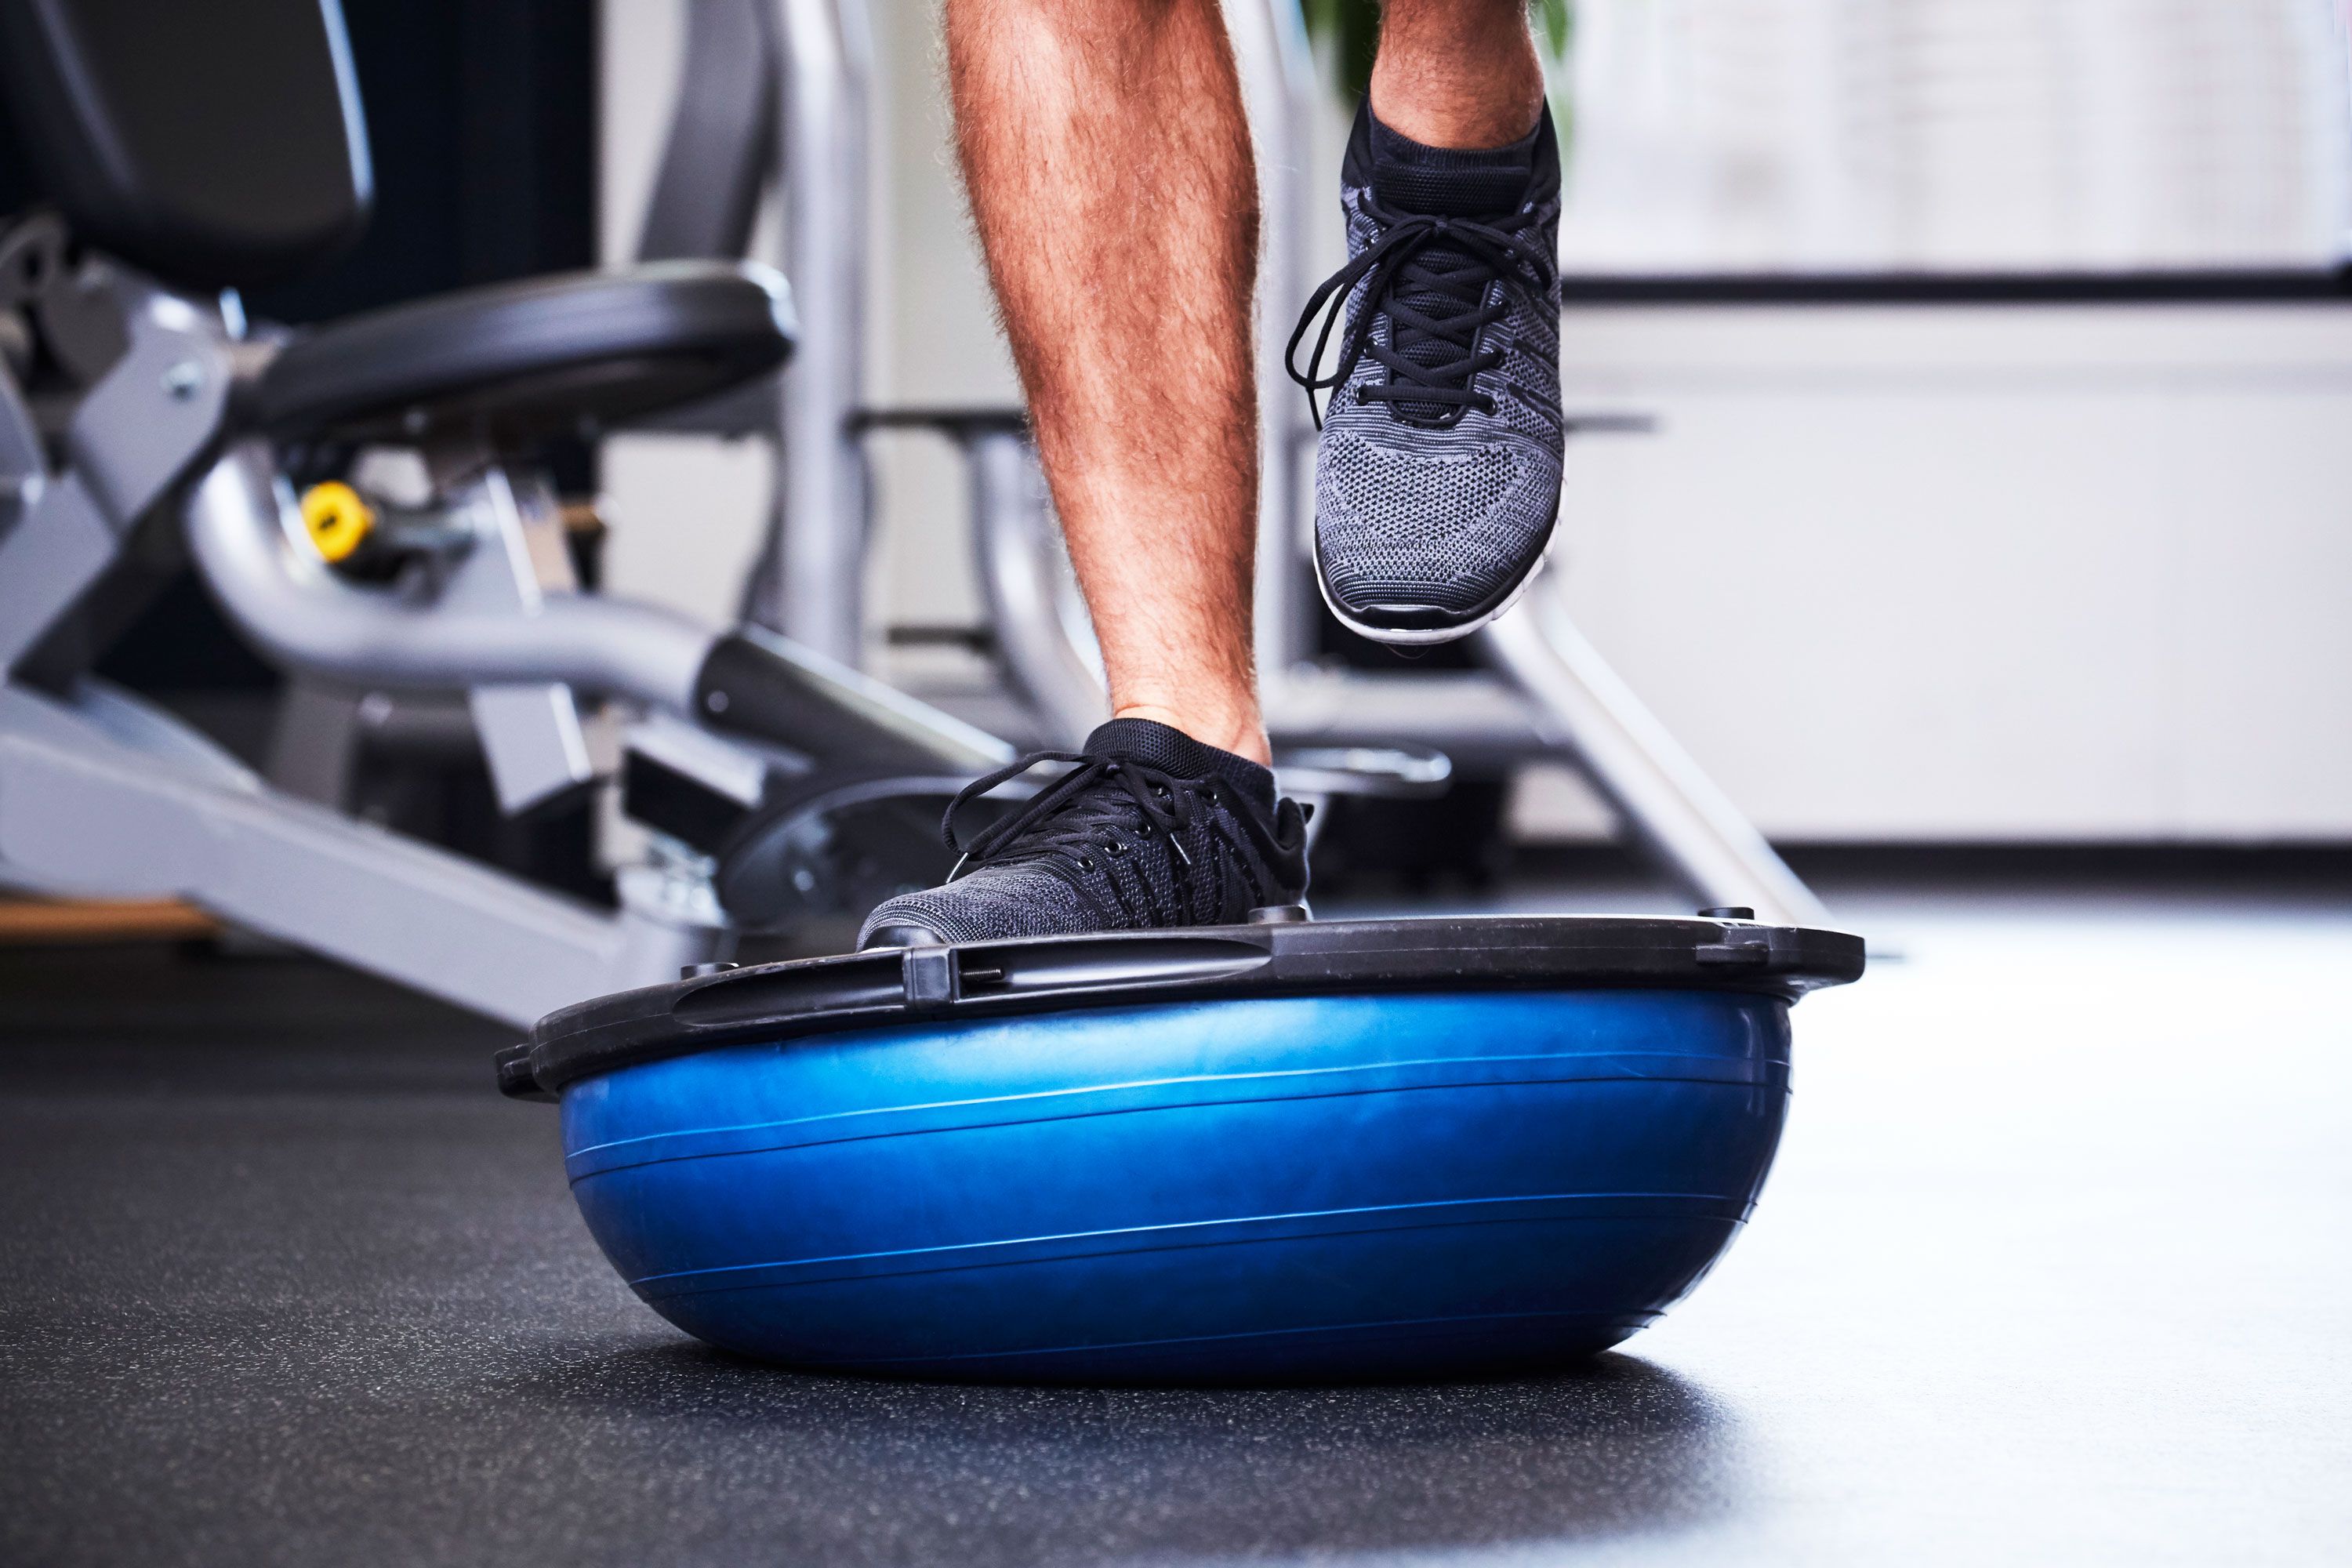 Stabilize the ankle ➔ 4 exercises that help